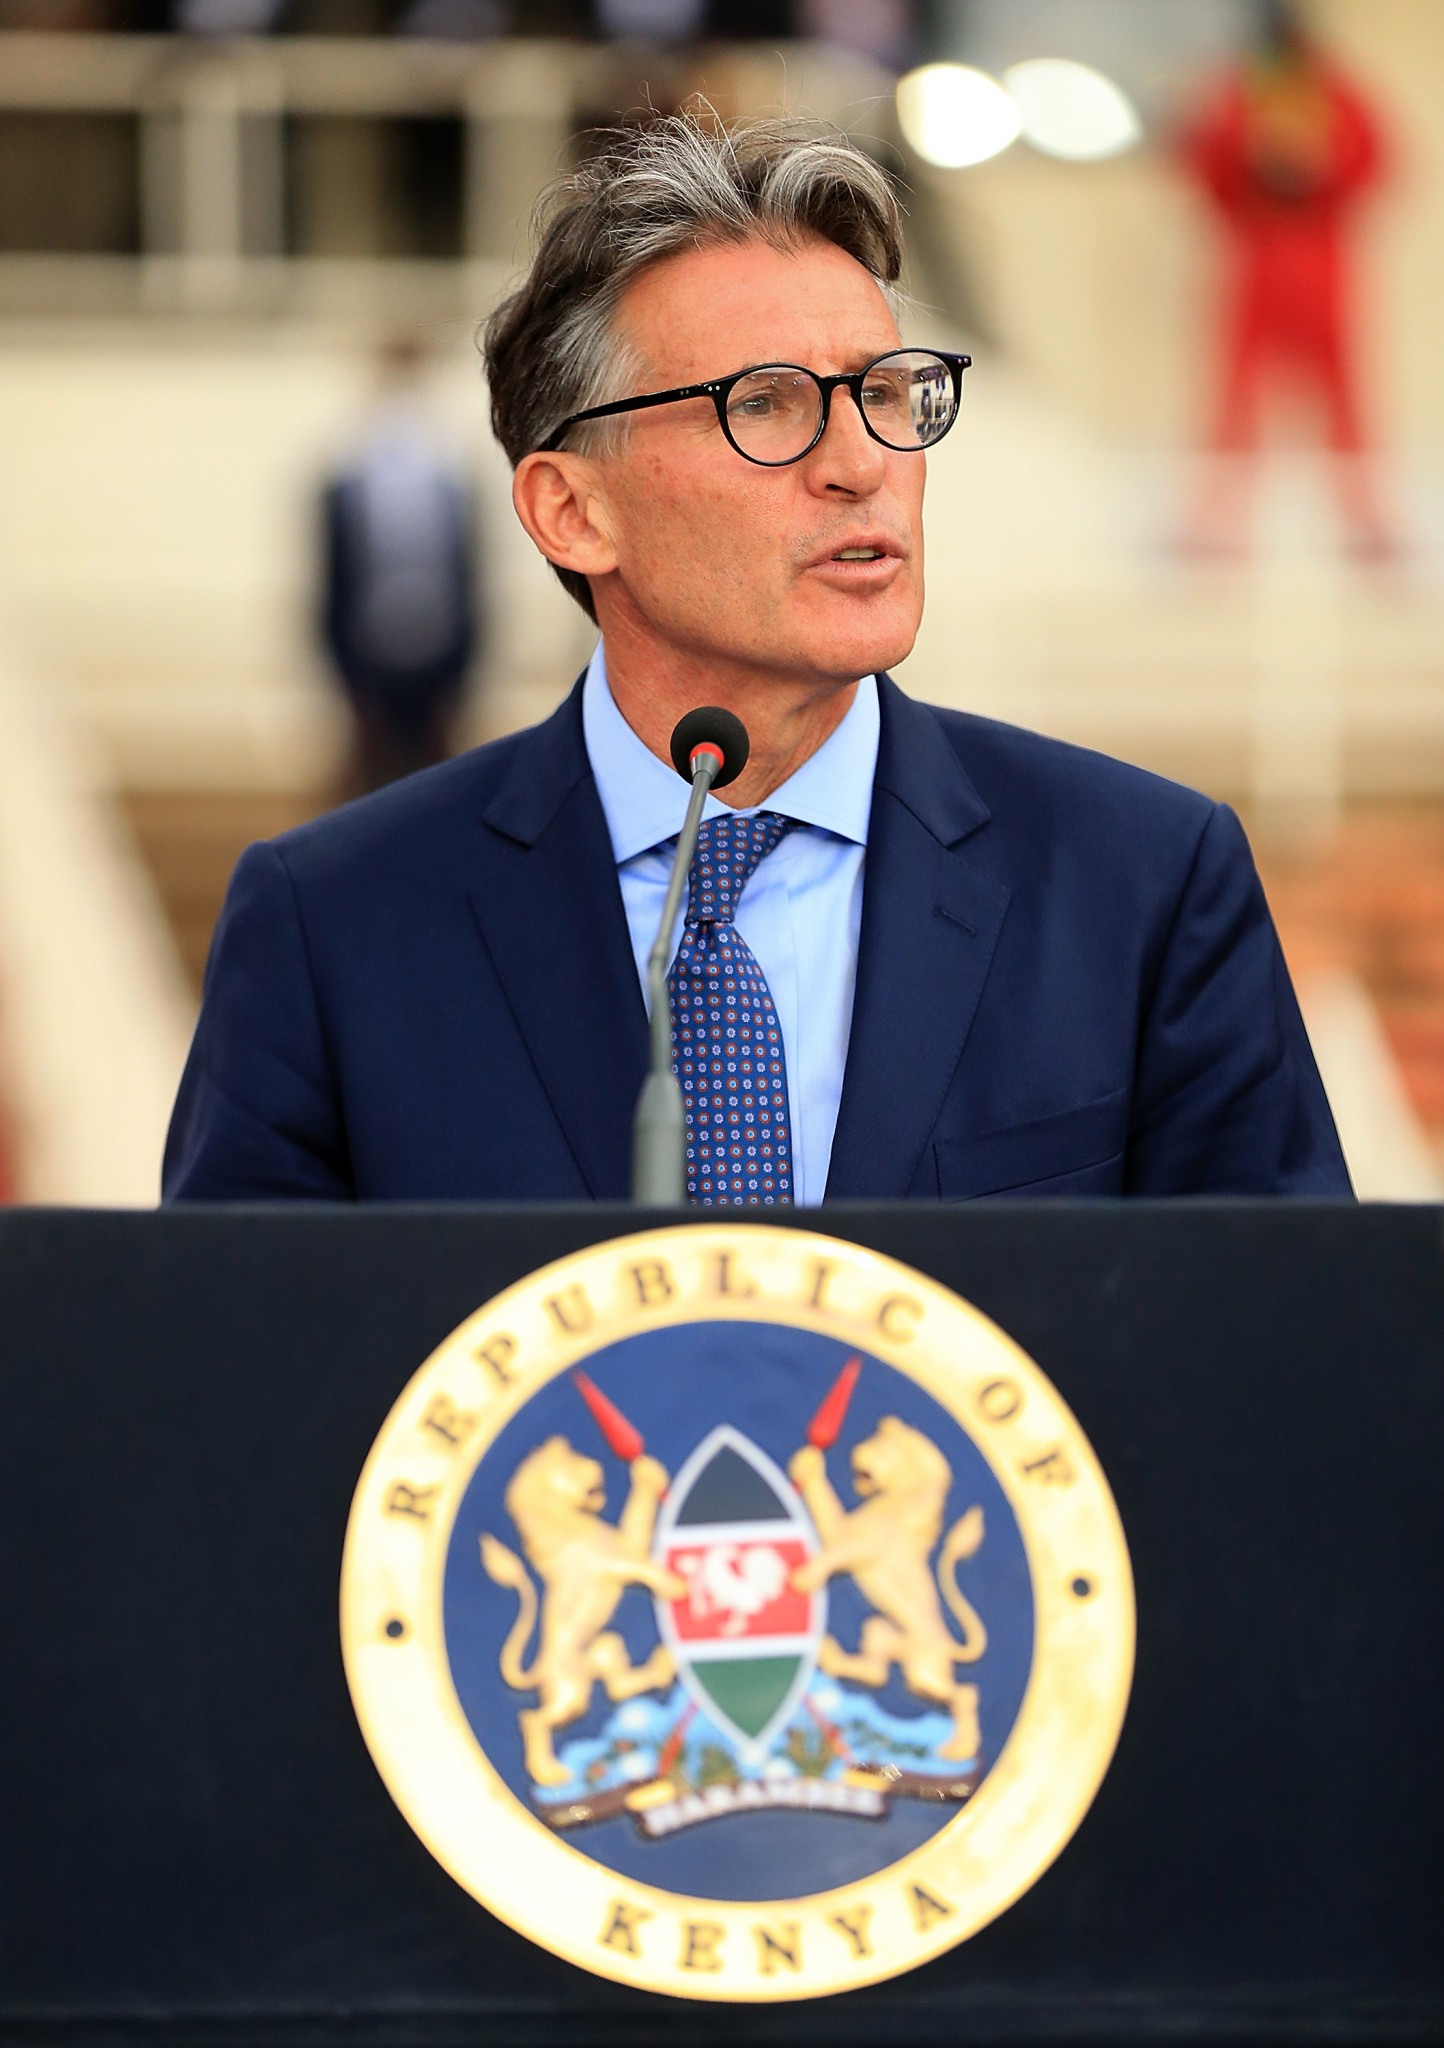 Sebastian Coe had previously spoken positively about Nairobi's bid to host the 2025 World Athletics Championships, but they have been awarded to Tokyo instead ©Getty Images